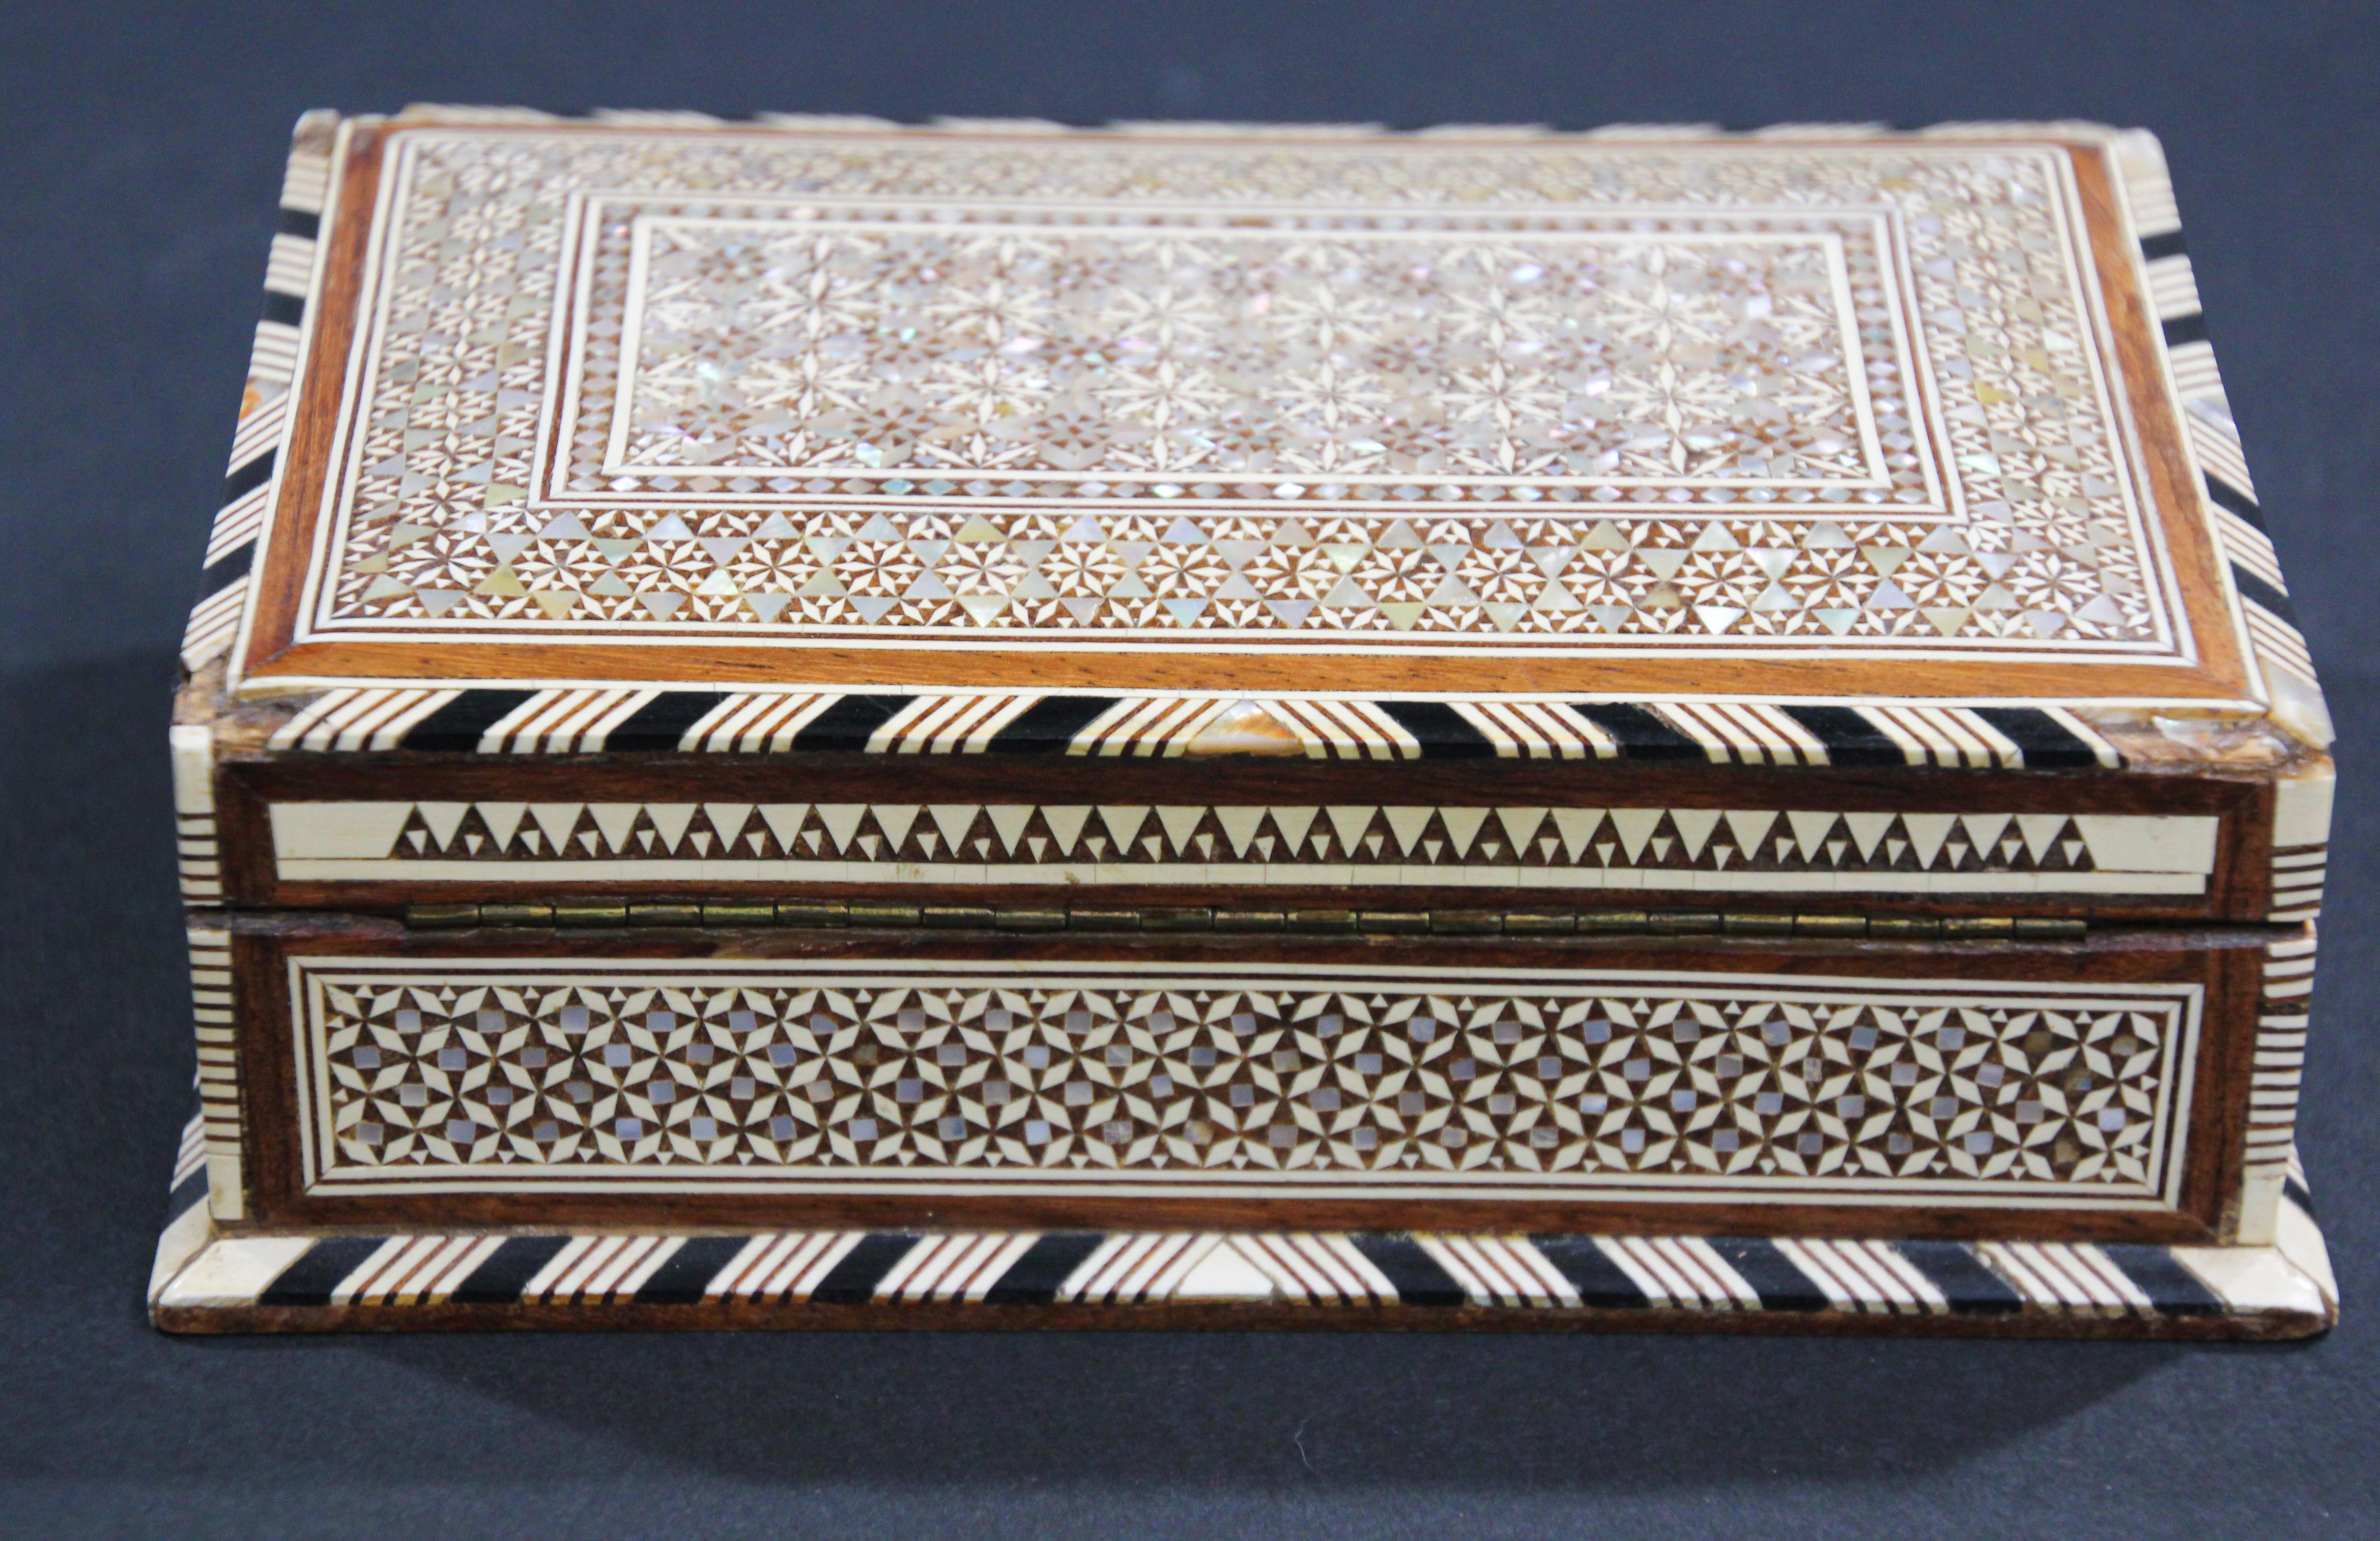 Moorish Handcrafted Middle Eastern Mosaic Inlaid Decorative Box For Sale 5